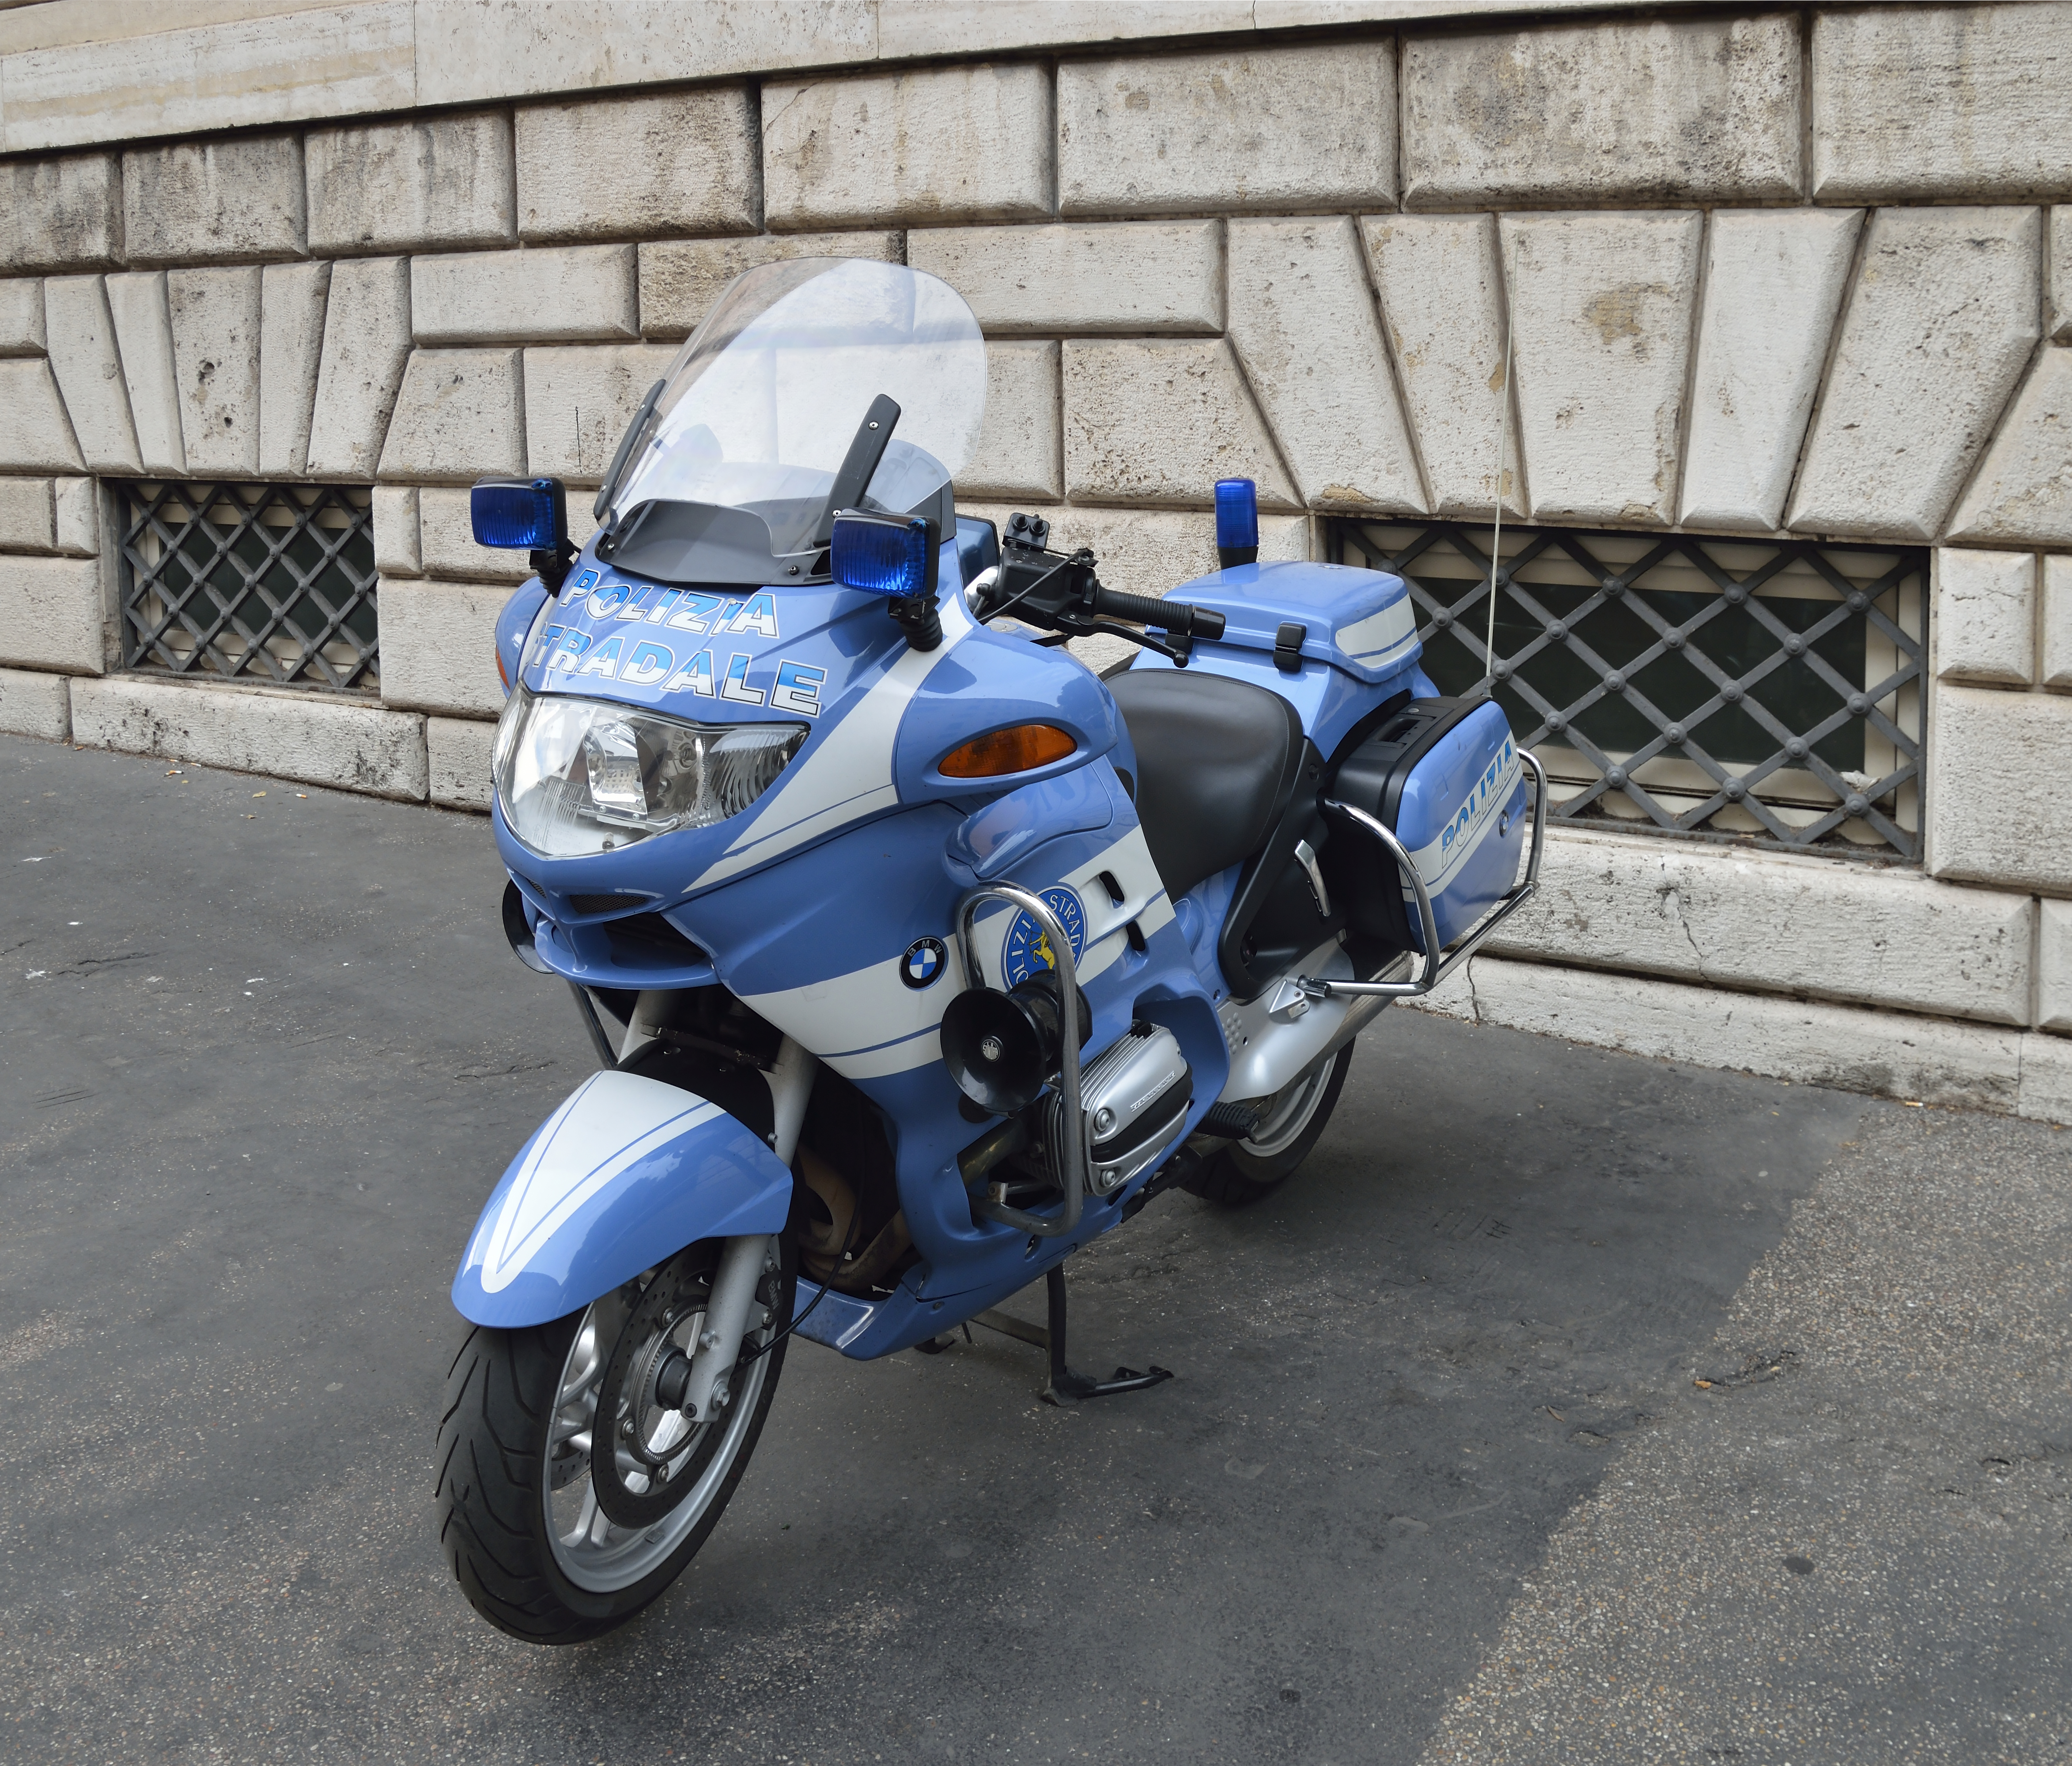 Motorcycle BMW R1150rt of italian police